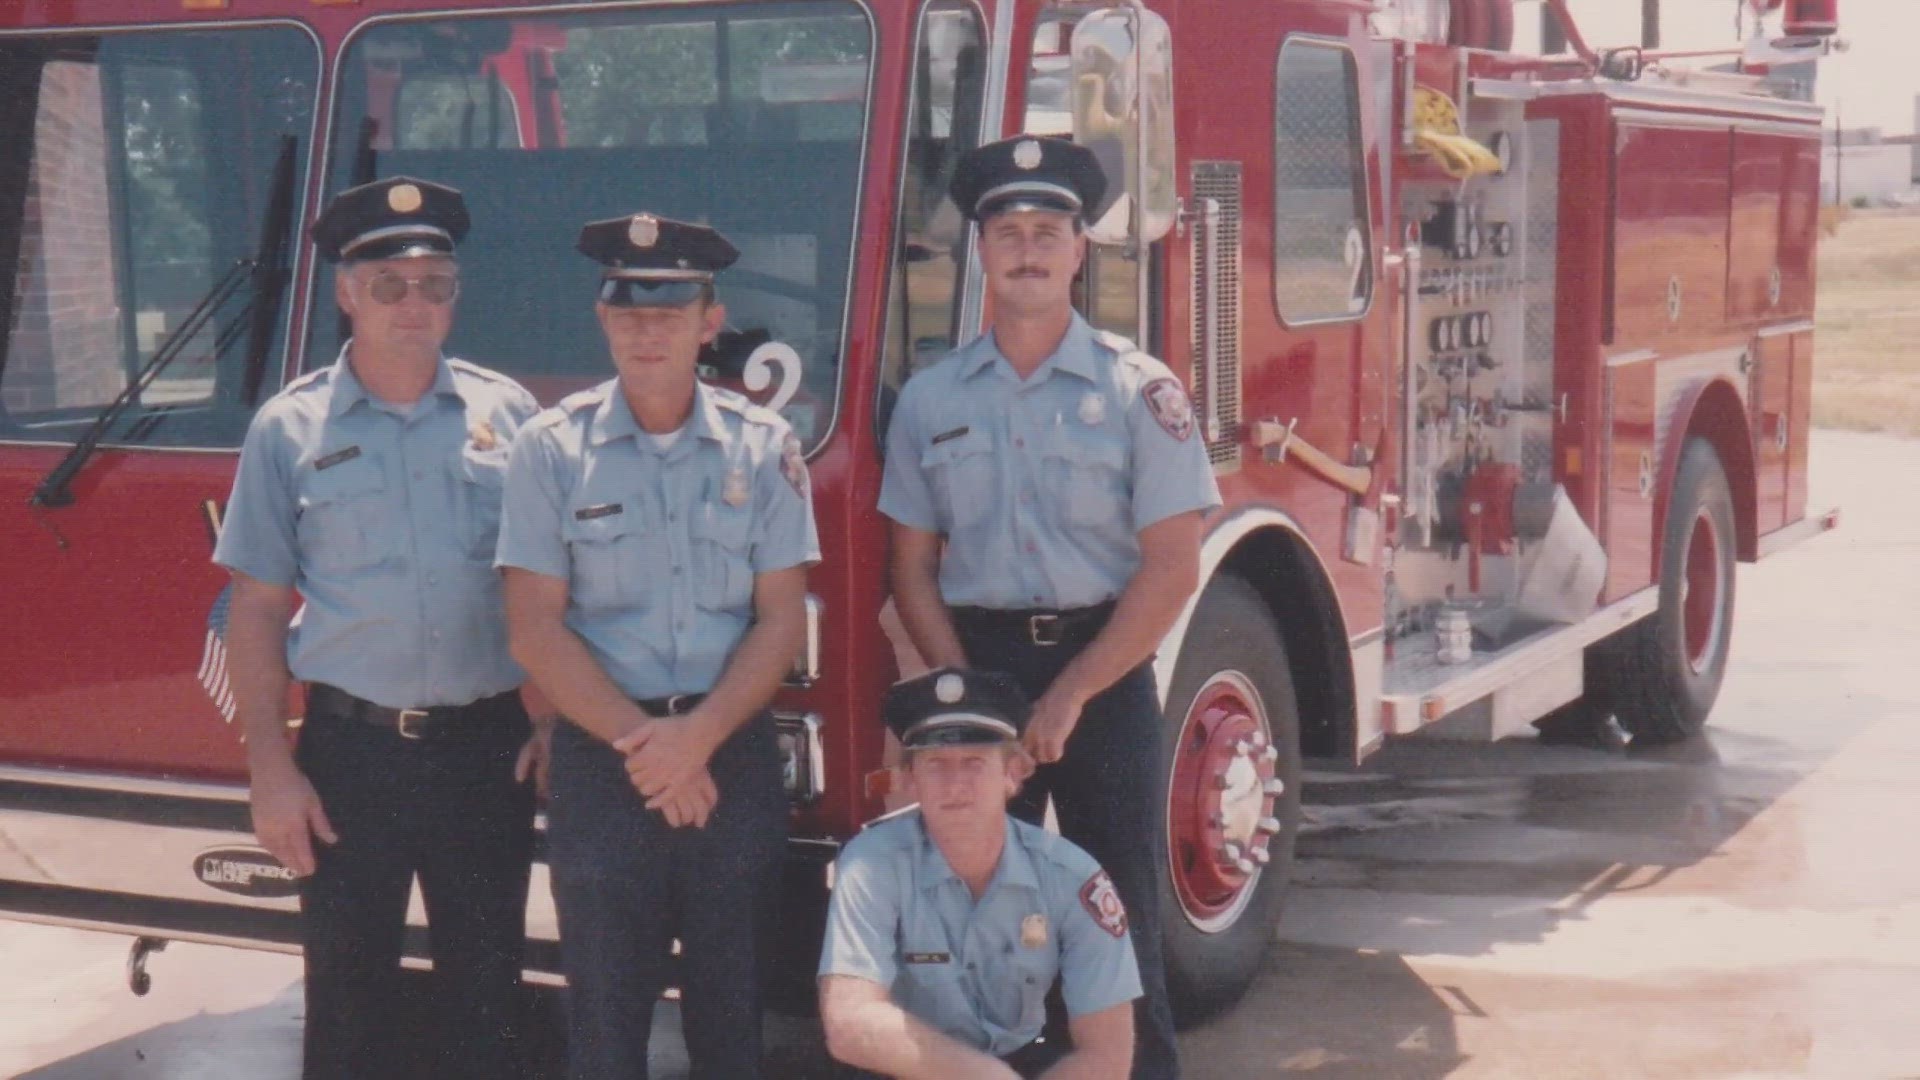 Members of the Bright family have served the Waco Fire Department since 1969, over a third of the Department's existence.